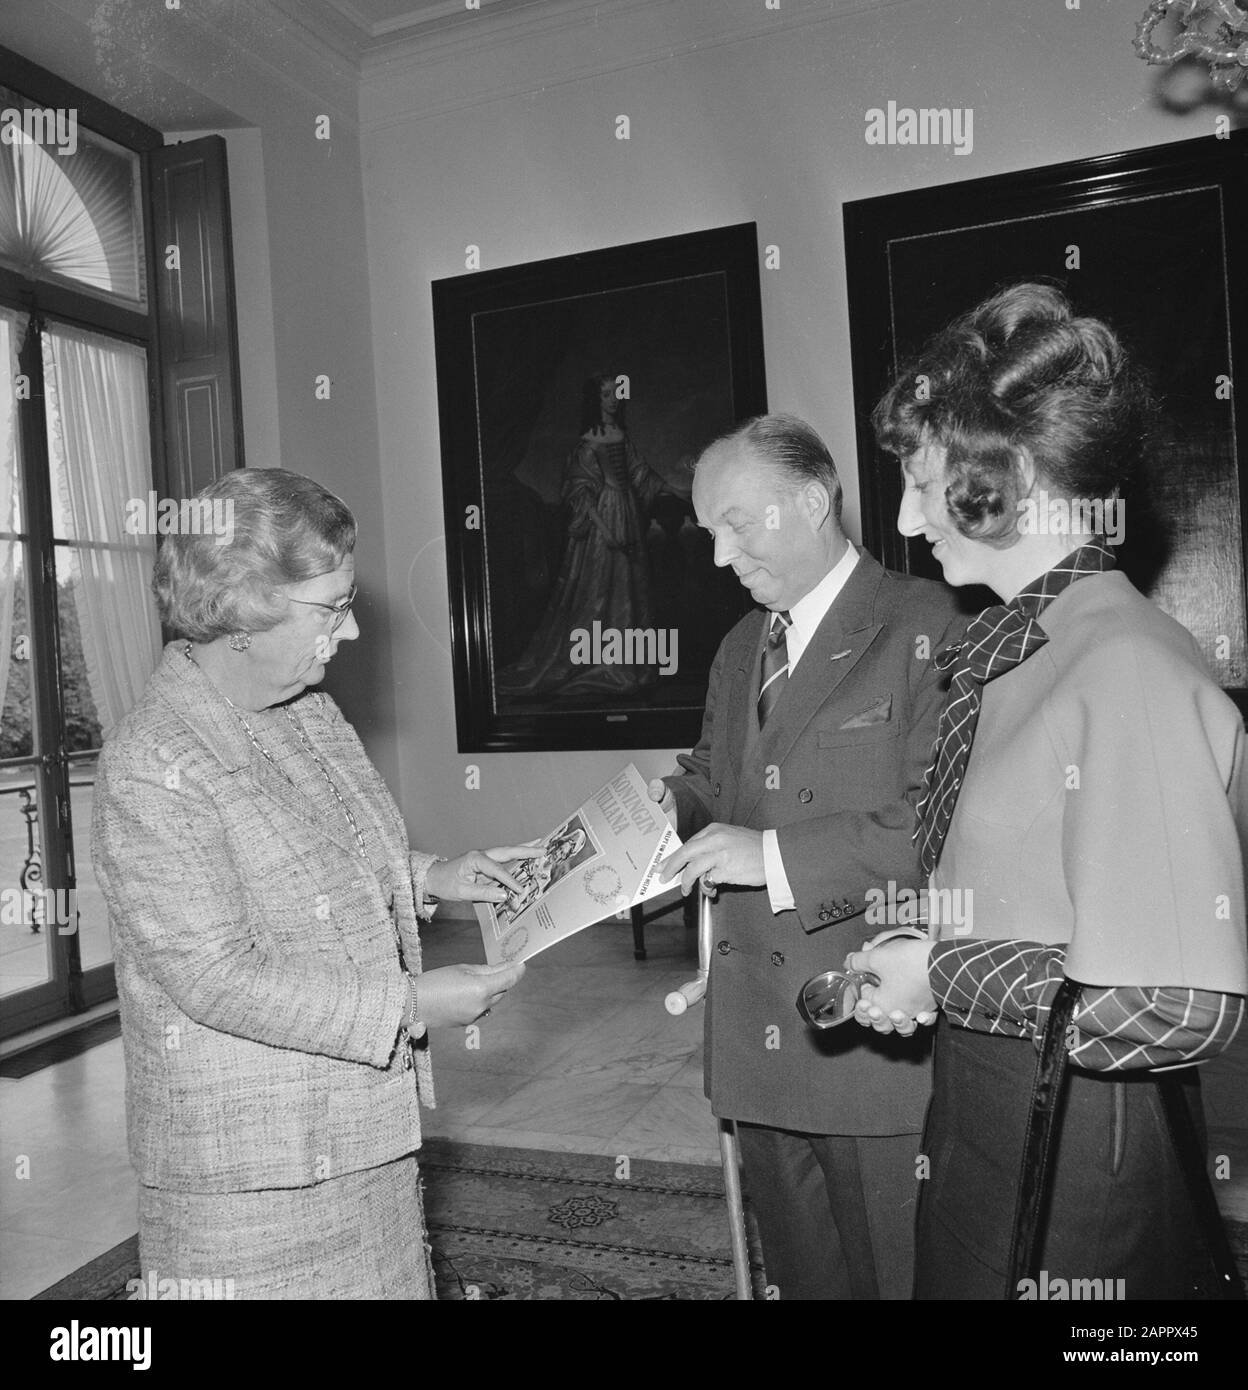 Queen Julia receives first copy Queen Juliana 1925-1965 from G. Krayenhoff. The Queen and Krayenhoff with magazine., Krayenhoff and Mirjam J. Annotation: Queen Juliana received the first copy of the photo magazine Queen Juliana on Thursday at palace Huis ten Bosch. The proceeds of the book are for the work of the Dutch Red Cross. The president of the Red Cross, Jr. G. Krayenhoff offered the book. Dutch daily newspaper: reformed family magazine/headred. P. Youngster... [et al.]. Amersfoort, 15-09-1973. Seen on Delpher on 19-05-2017, resolver.kb.nl/ resolve?urn=ddd:010633186:mpeg21:a0105 Date: S Stock Photo